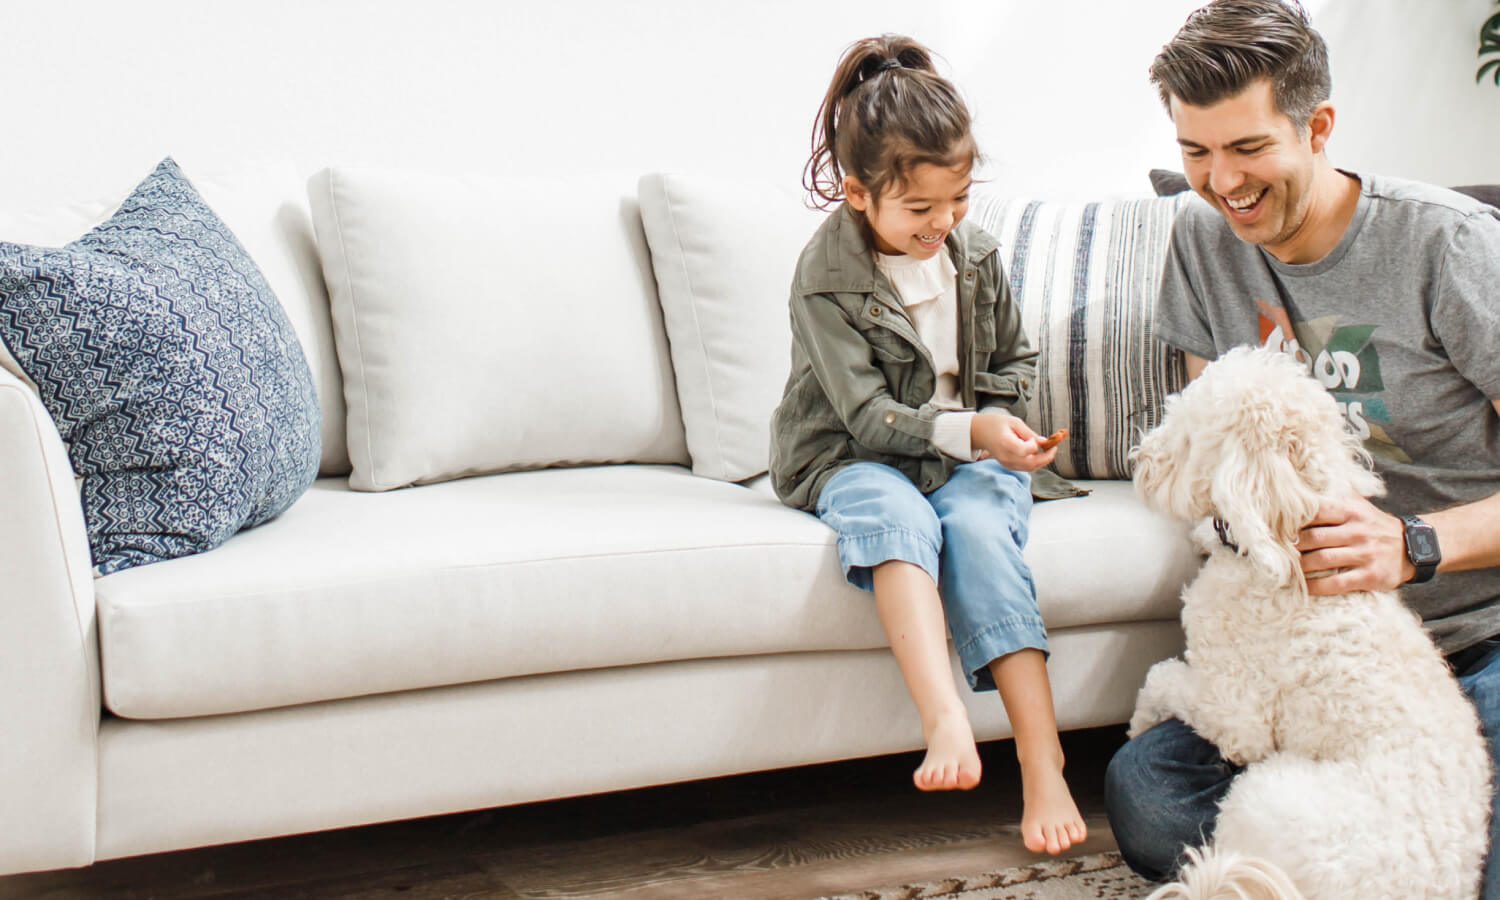 IRL: Daughter and father with white dog on white dekayess sofa